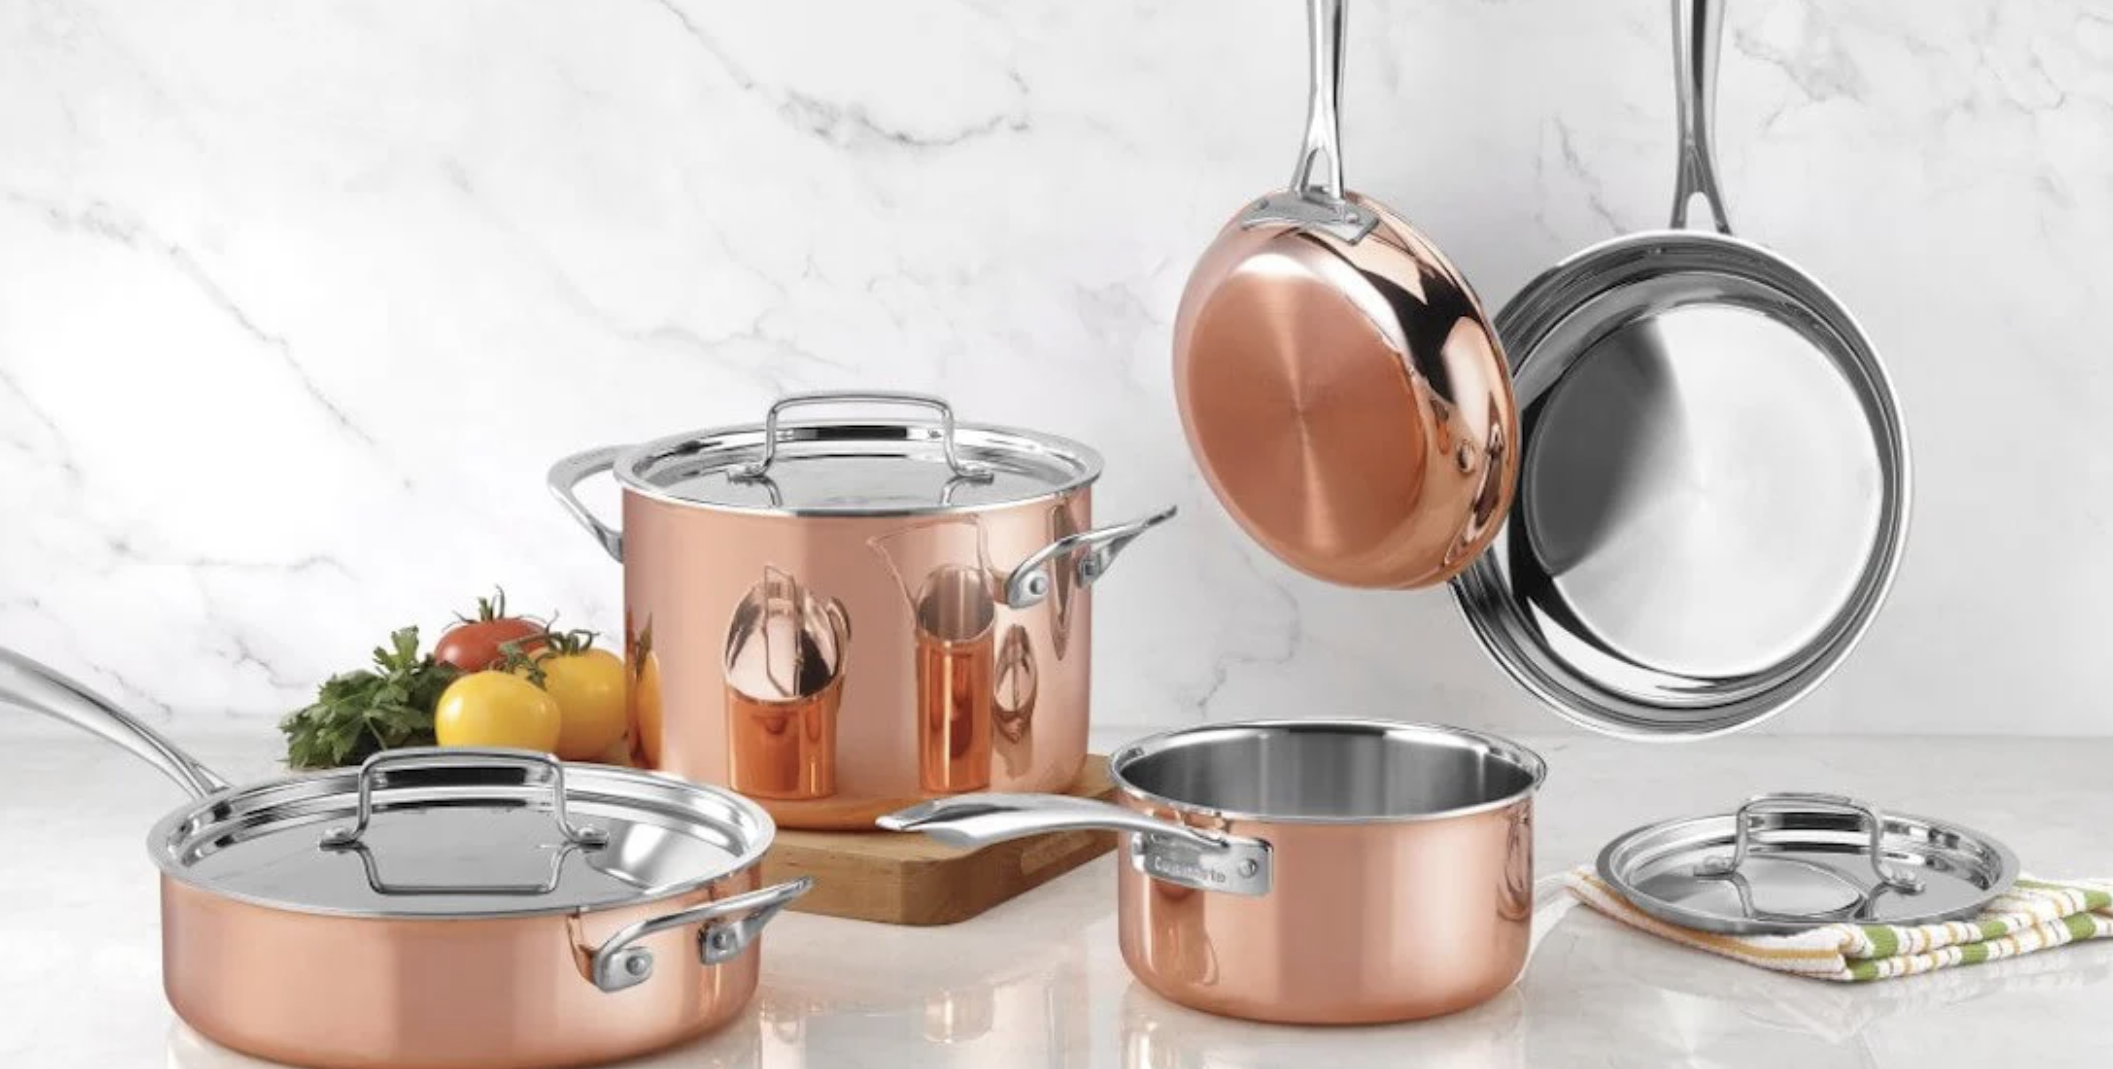 Top 6 Kitchenware Brands That Are Cheaper From Overseas Than Local Stores  (And Where To Buy Them!)